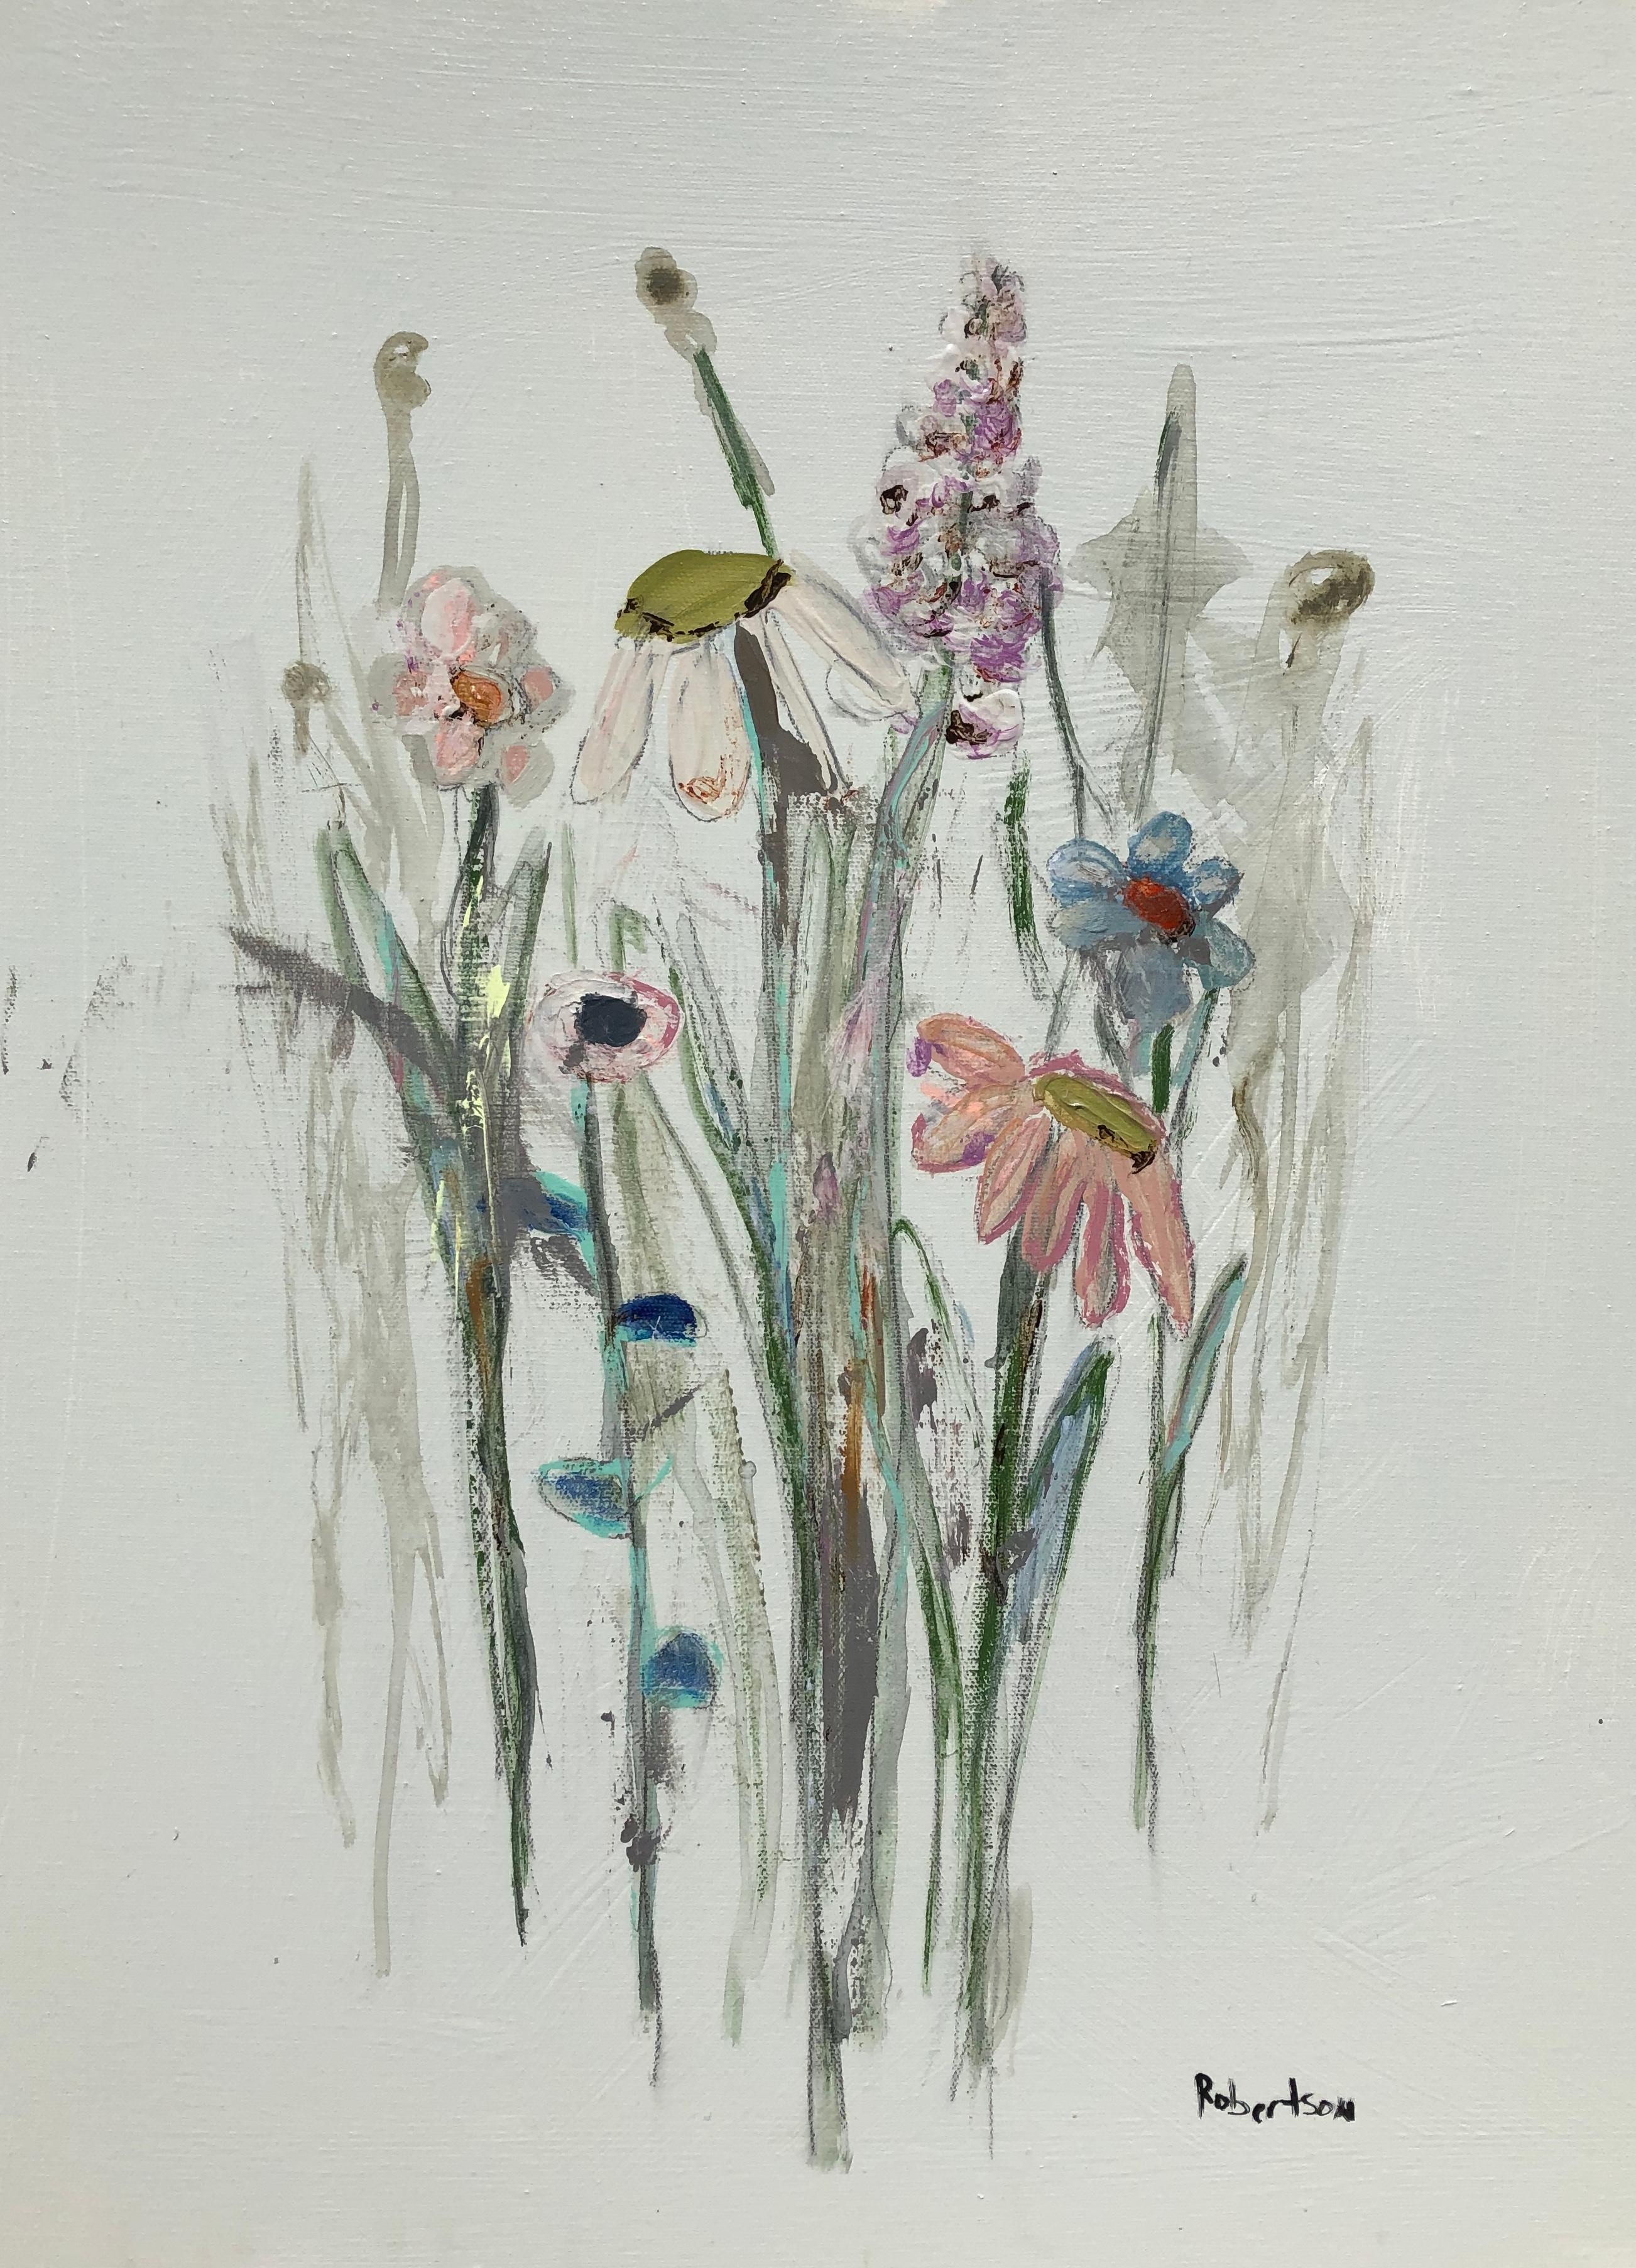 'The Glory of the Garden II' is a medium size Impressionist mixed media on canvas floral painting of vertical format, created by American artist Sarah Robertson in 2019. Painted on a white background allowing our eye to focus on the subject